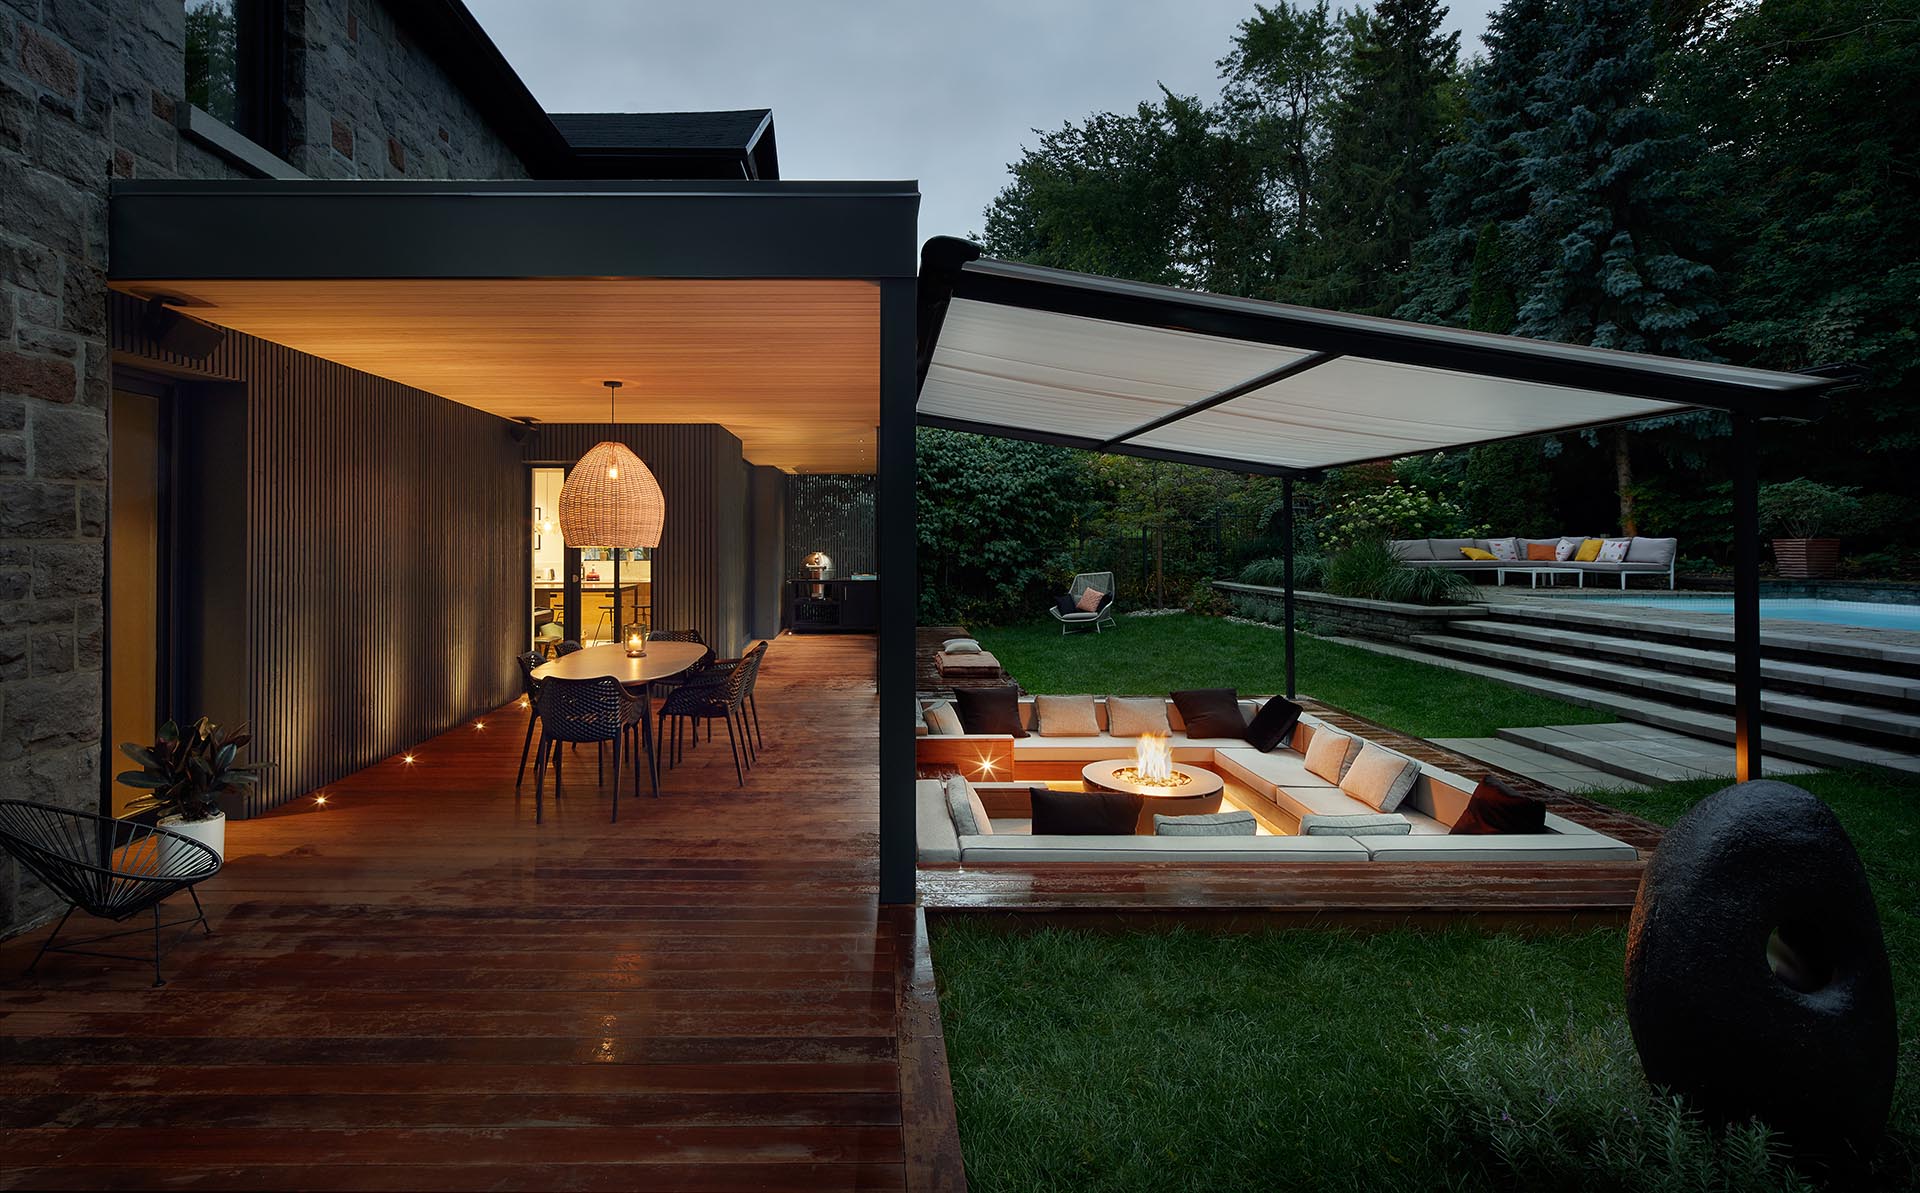 A covered outdoor dining area and sunken conversation pit with a fire bowl.